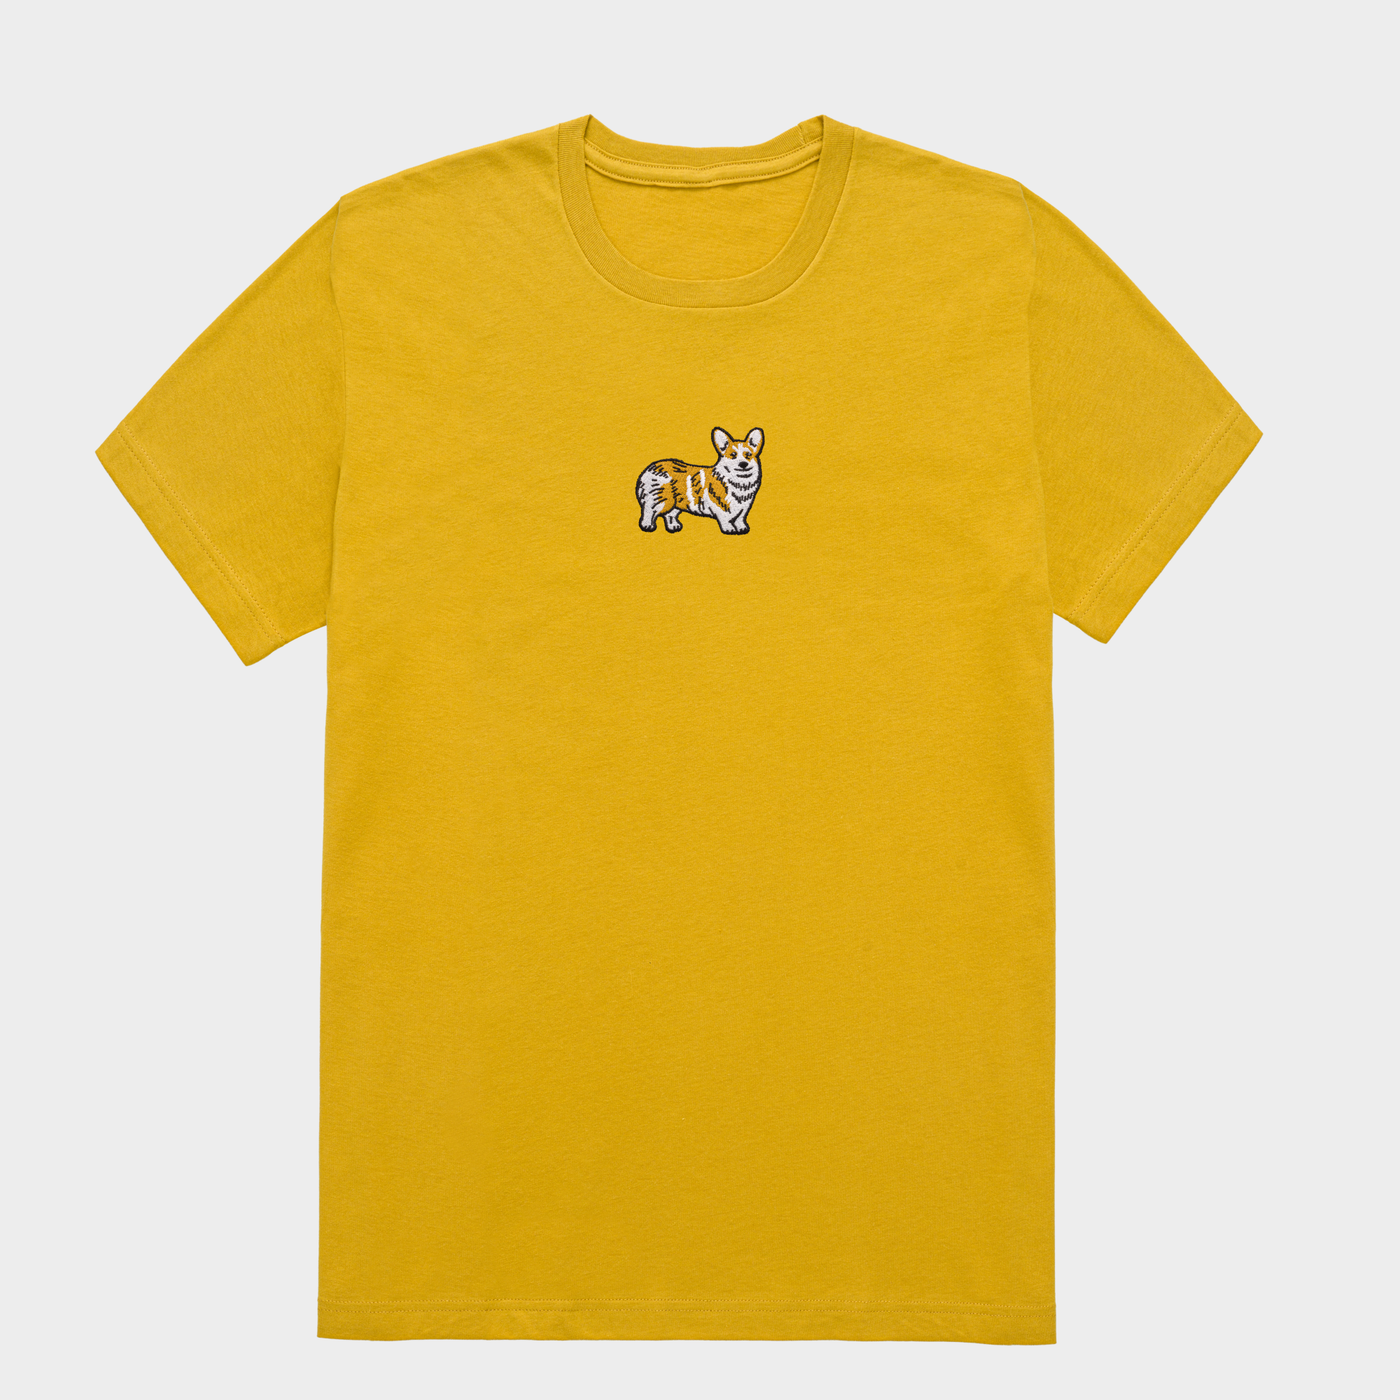 Bobby's Planet Women's Embroidered Corgi T-Shirt from Paws Dog Cat Animals Collection in Mustard Color#color_mustard